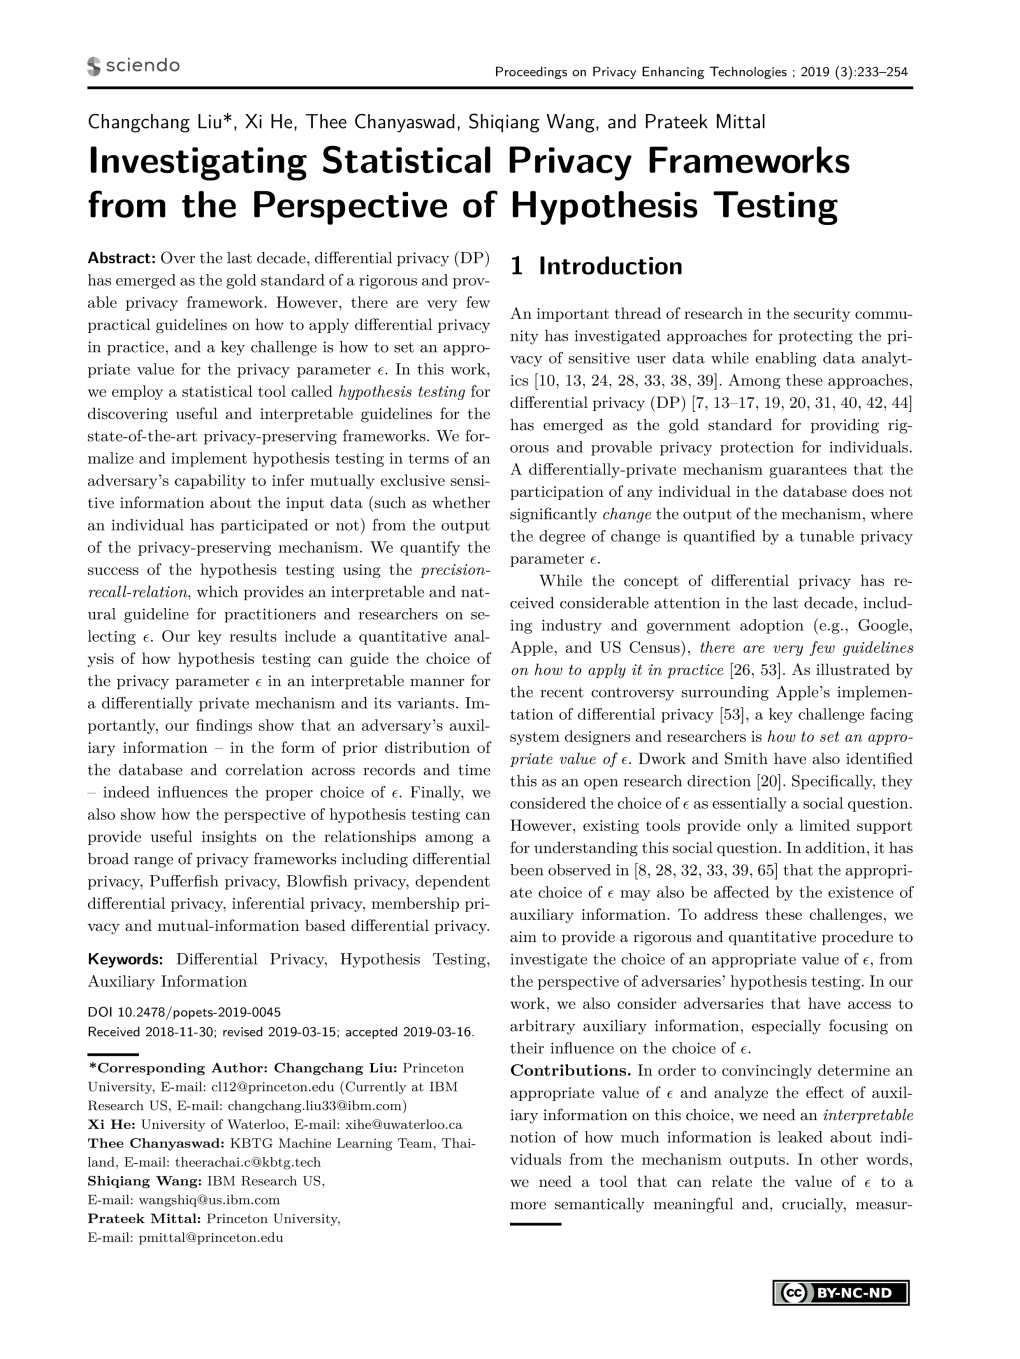 Investigating Statistical Privacy Frameworks from the Perspective of Hypothesis Testing 234 Able Quantity